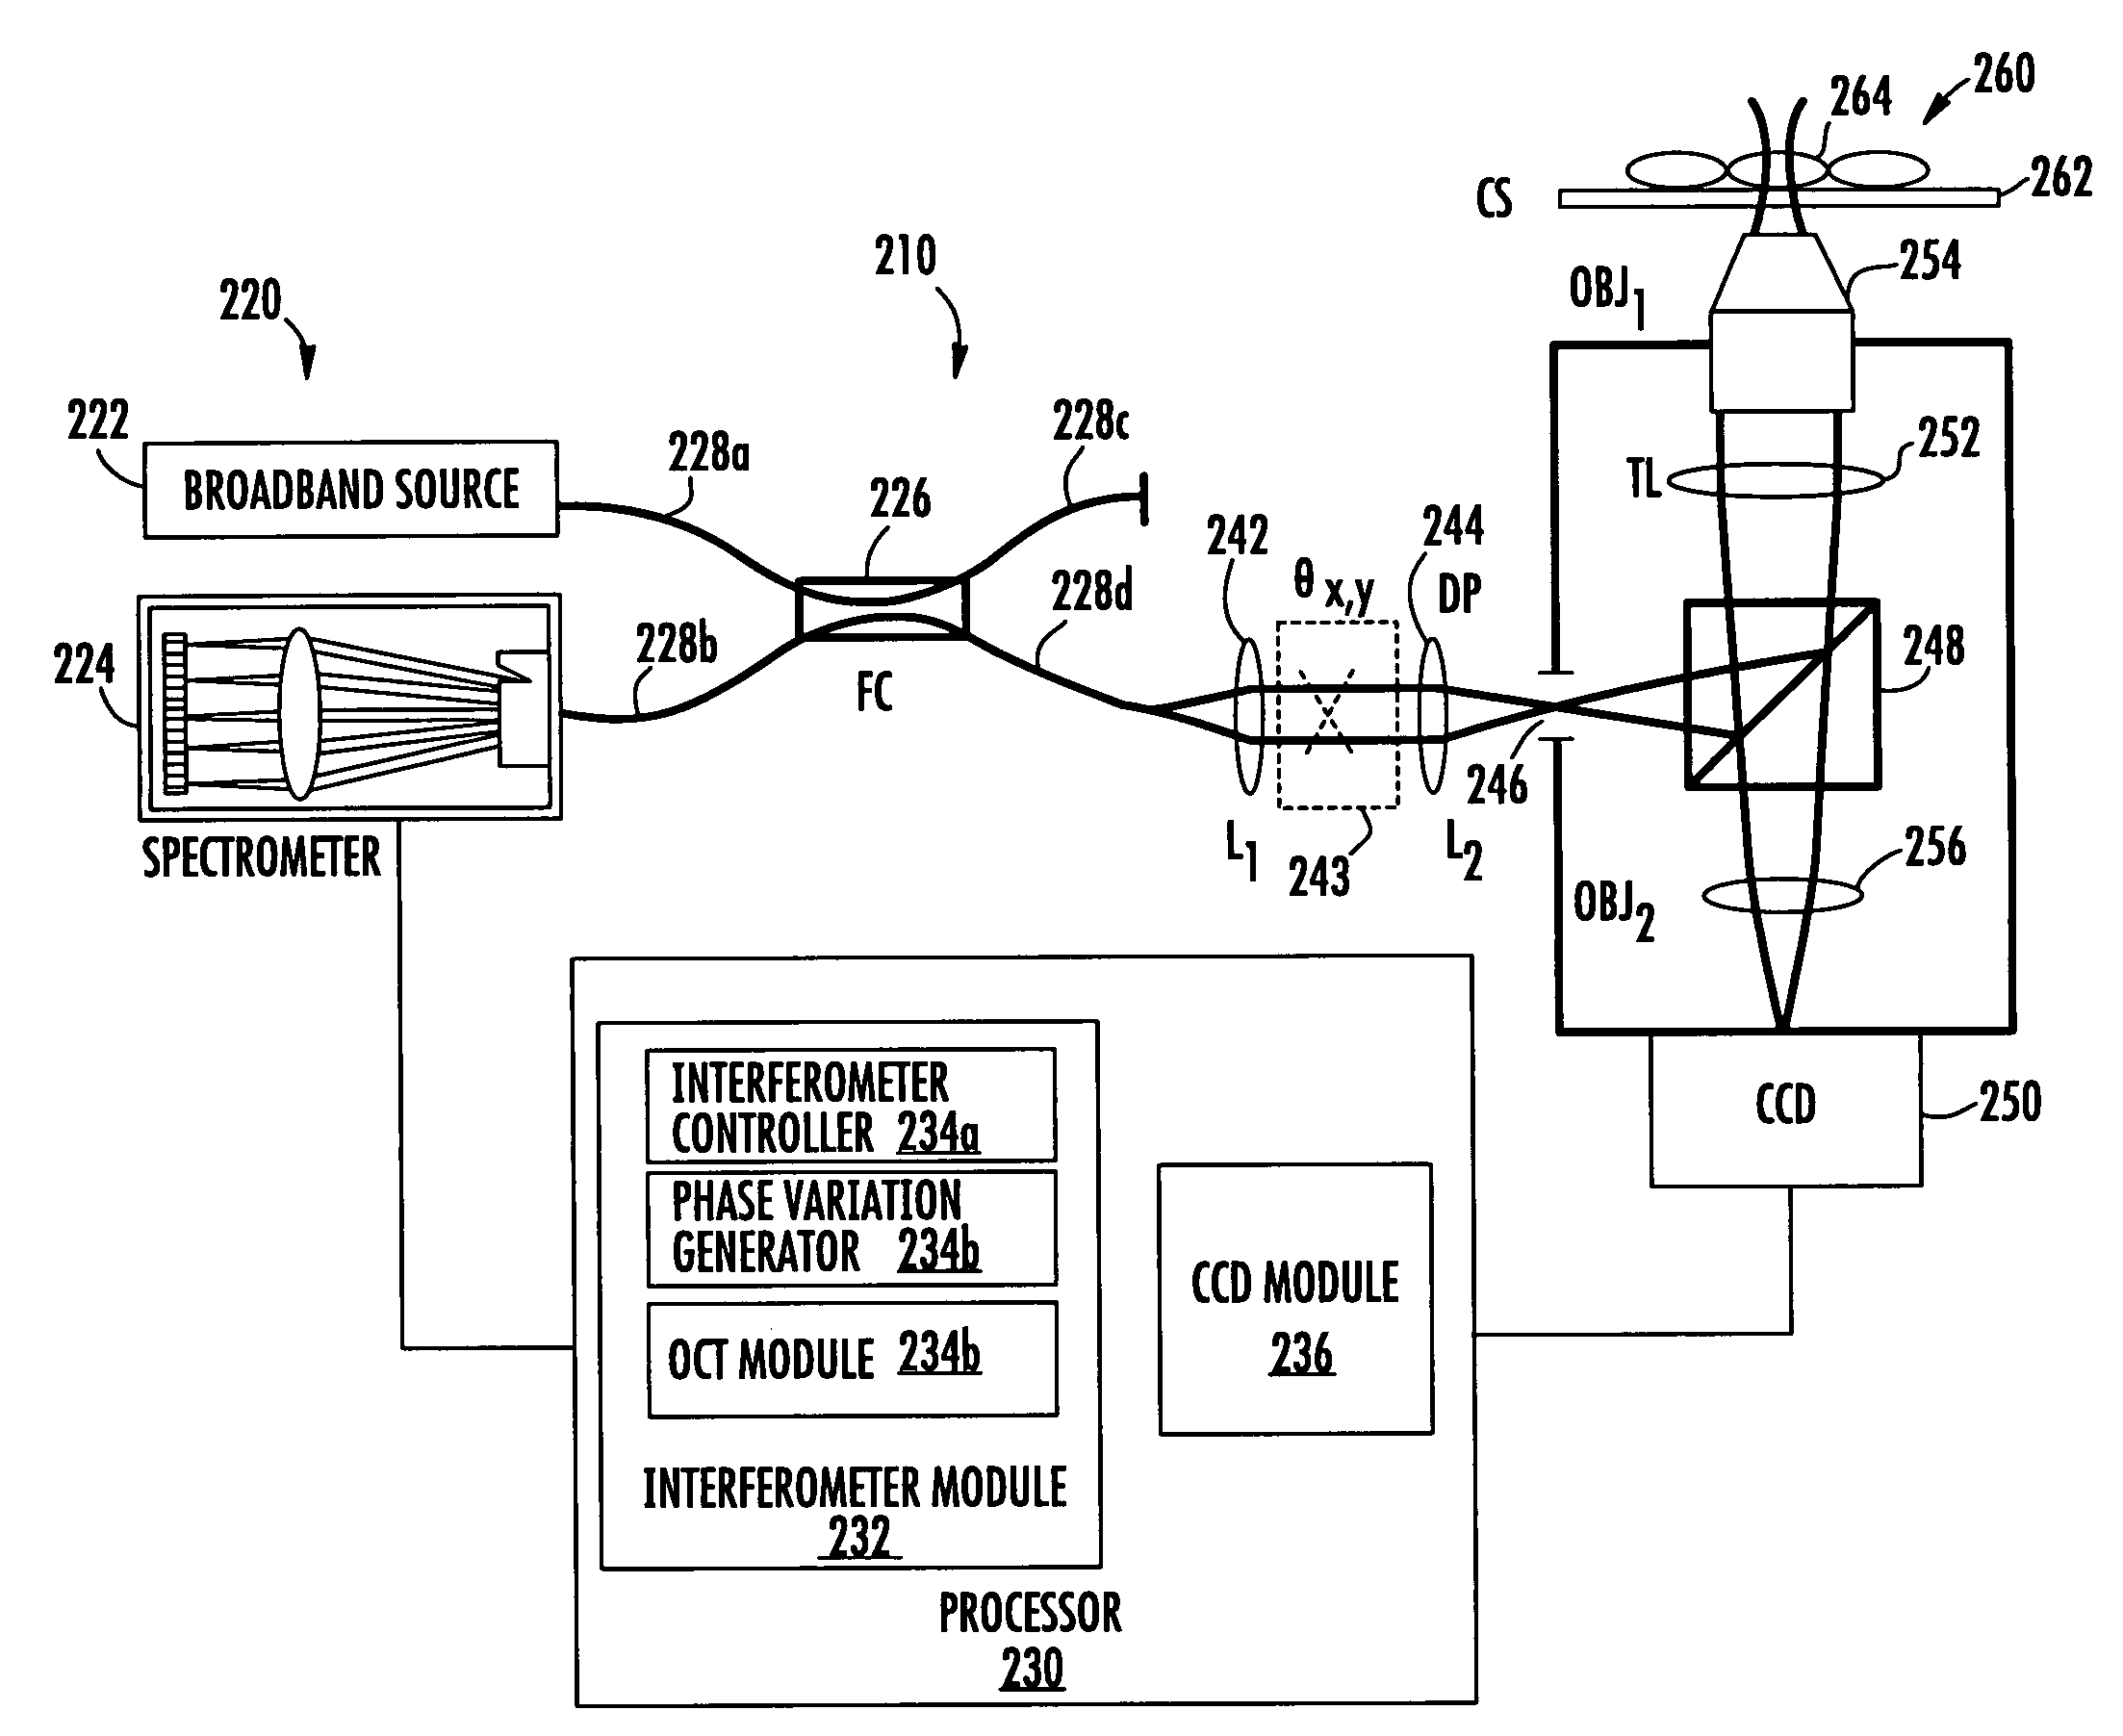 Methods, systems and computer program products for characterizing structures based on interferometric phase data